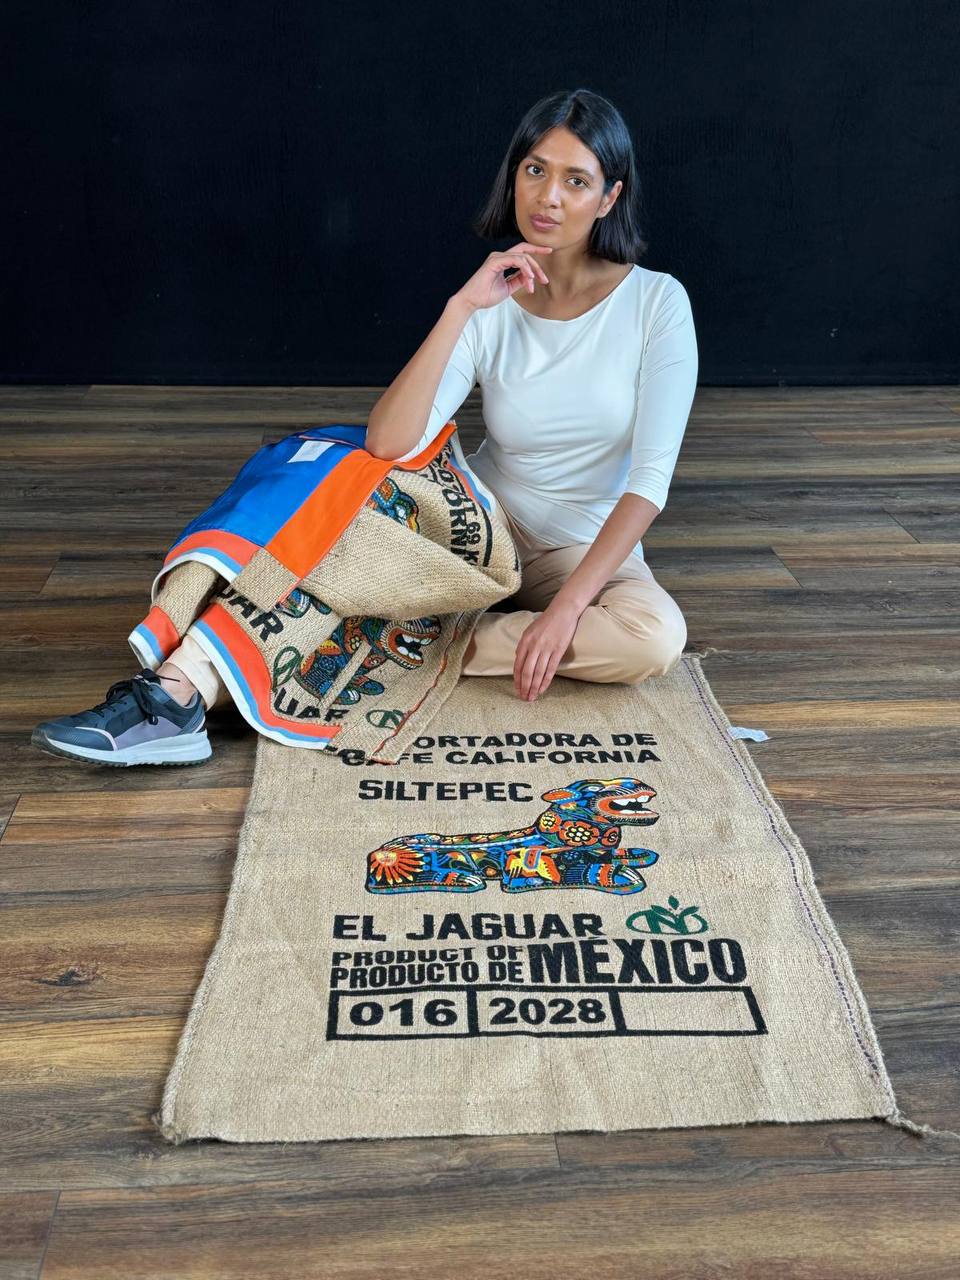 Young lady showing a rare Mexican coffee sack with a stunning JAGUAR print which her eco jacket is made of